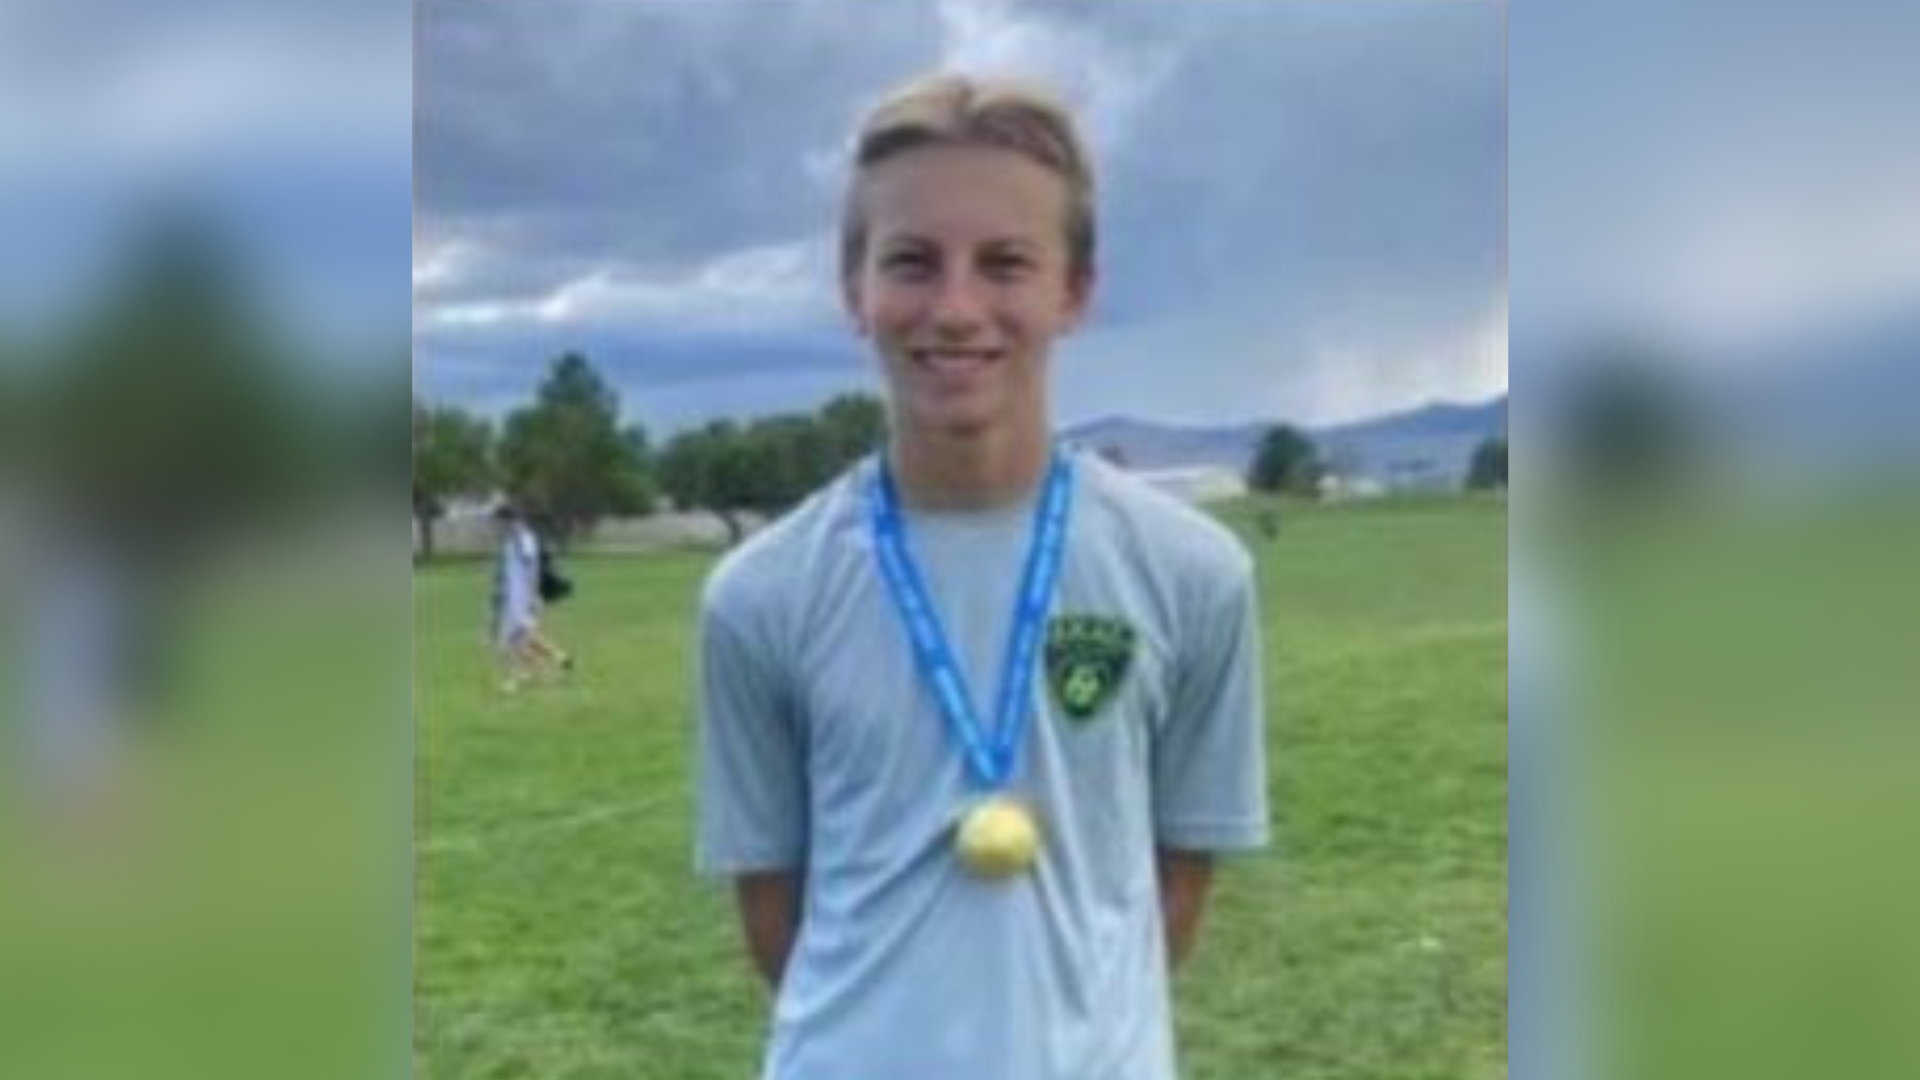 A 17-year-old reported missing from Morgan County, Utah, was located on Wednesday night in Californ...